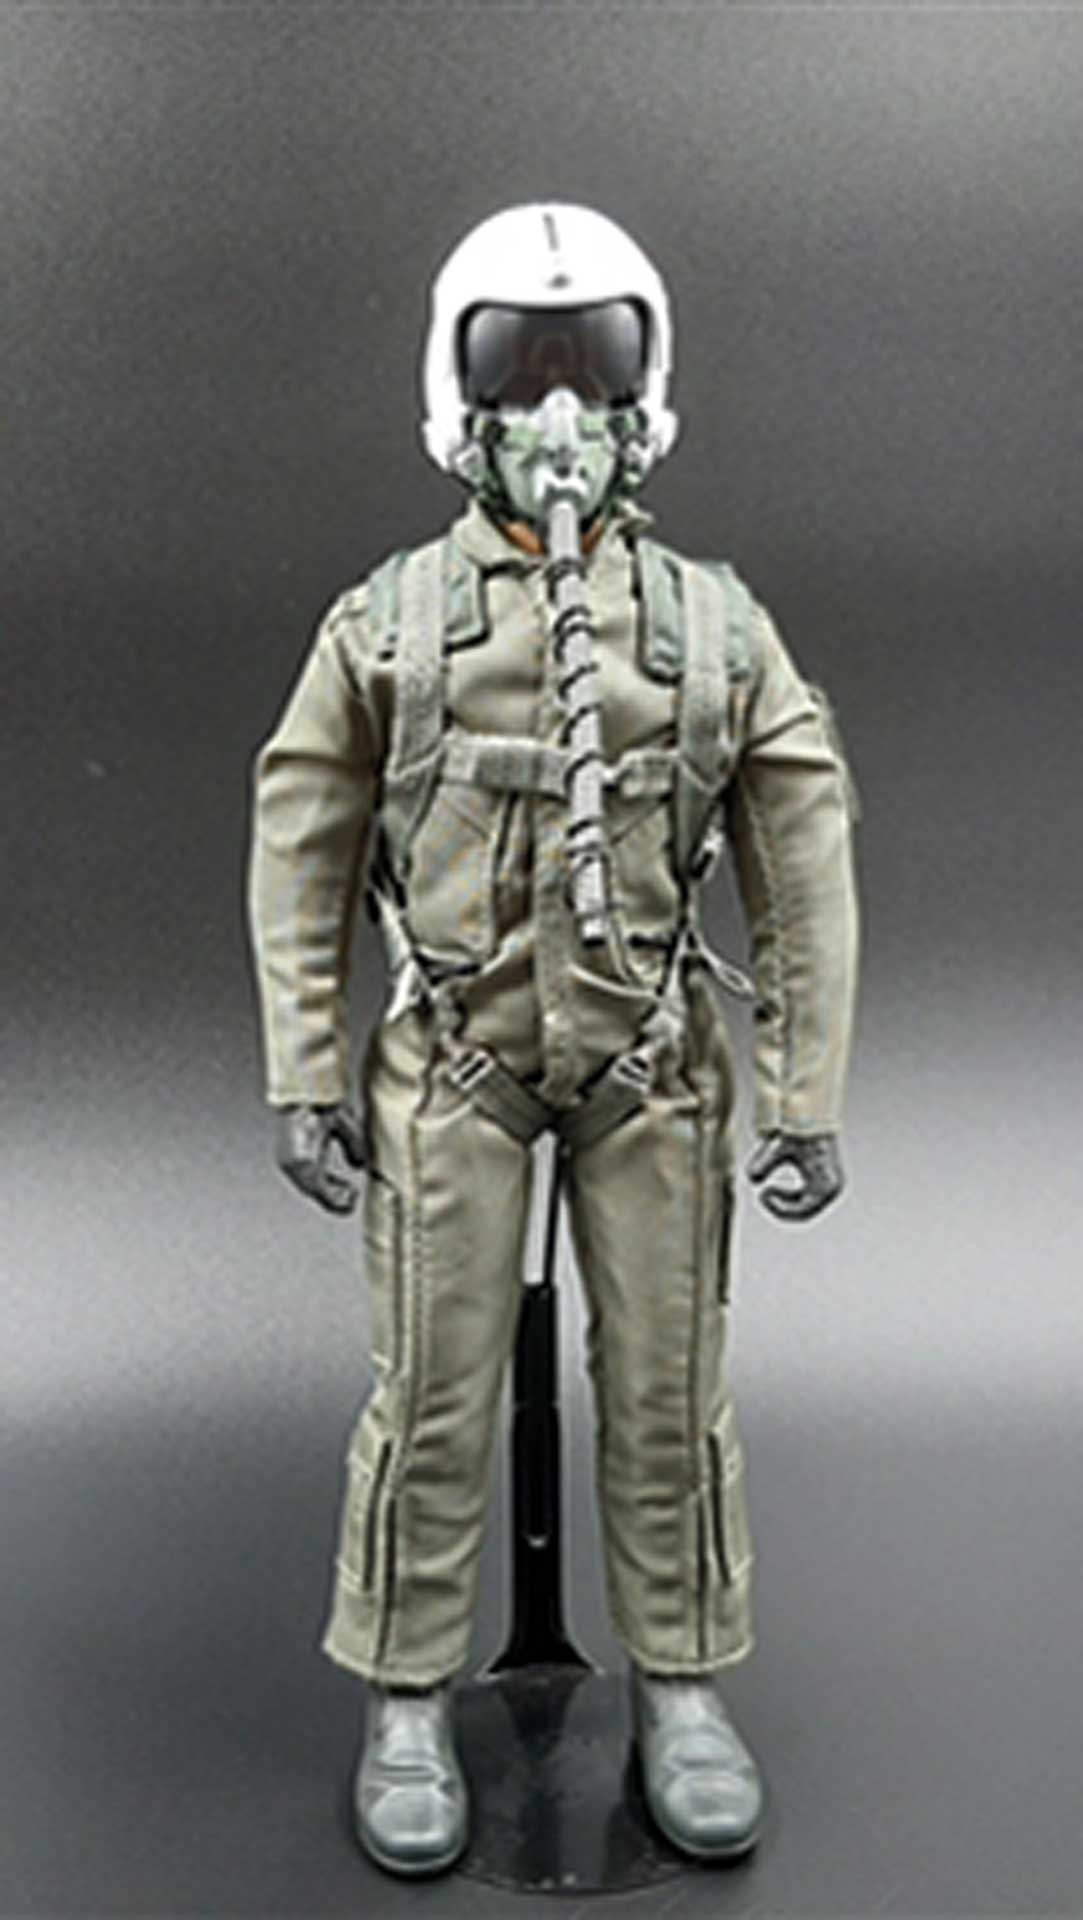 Warbird Pilots Scale Pilot Jet modern 1:5-1:6 Green with head control (HV) SPECIAL white helmet!